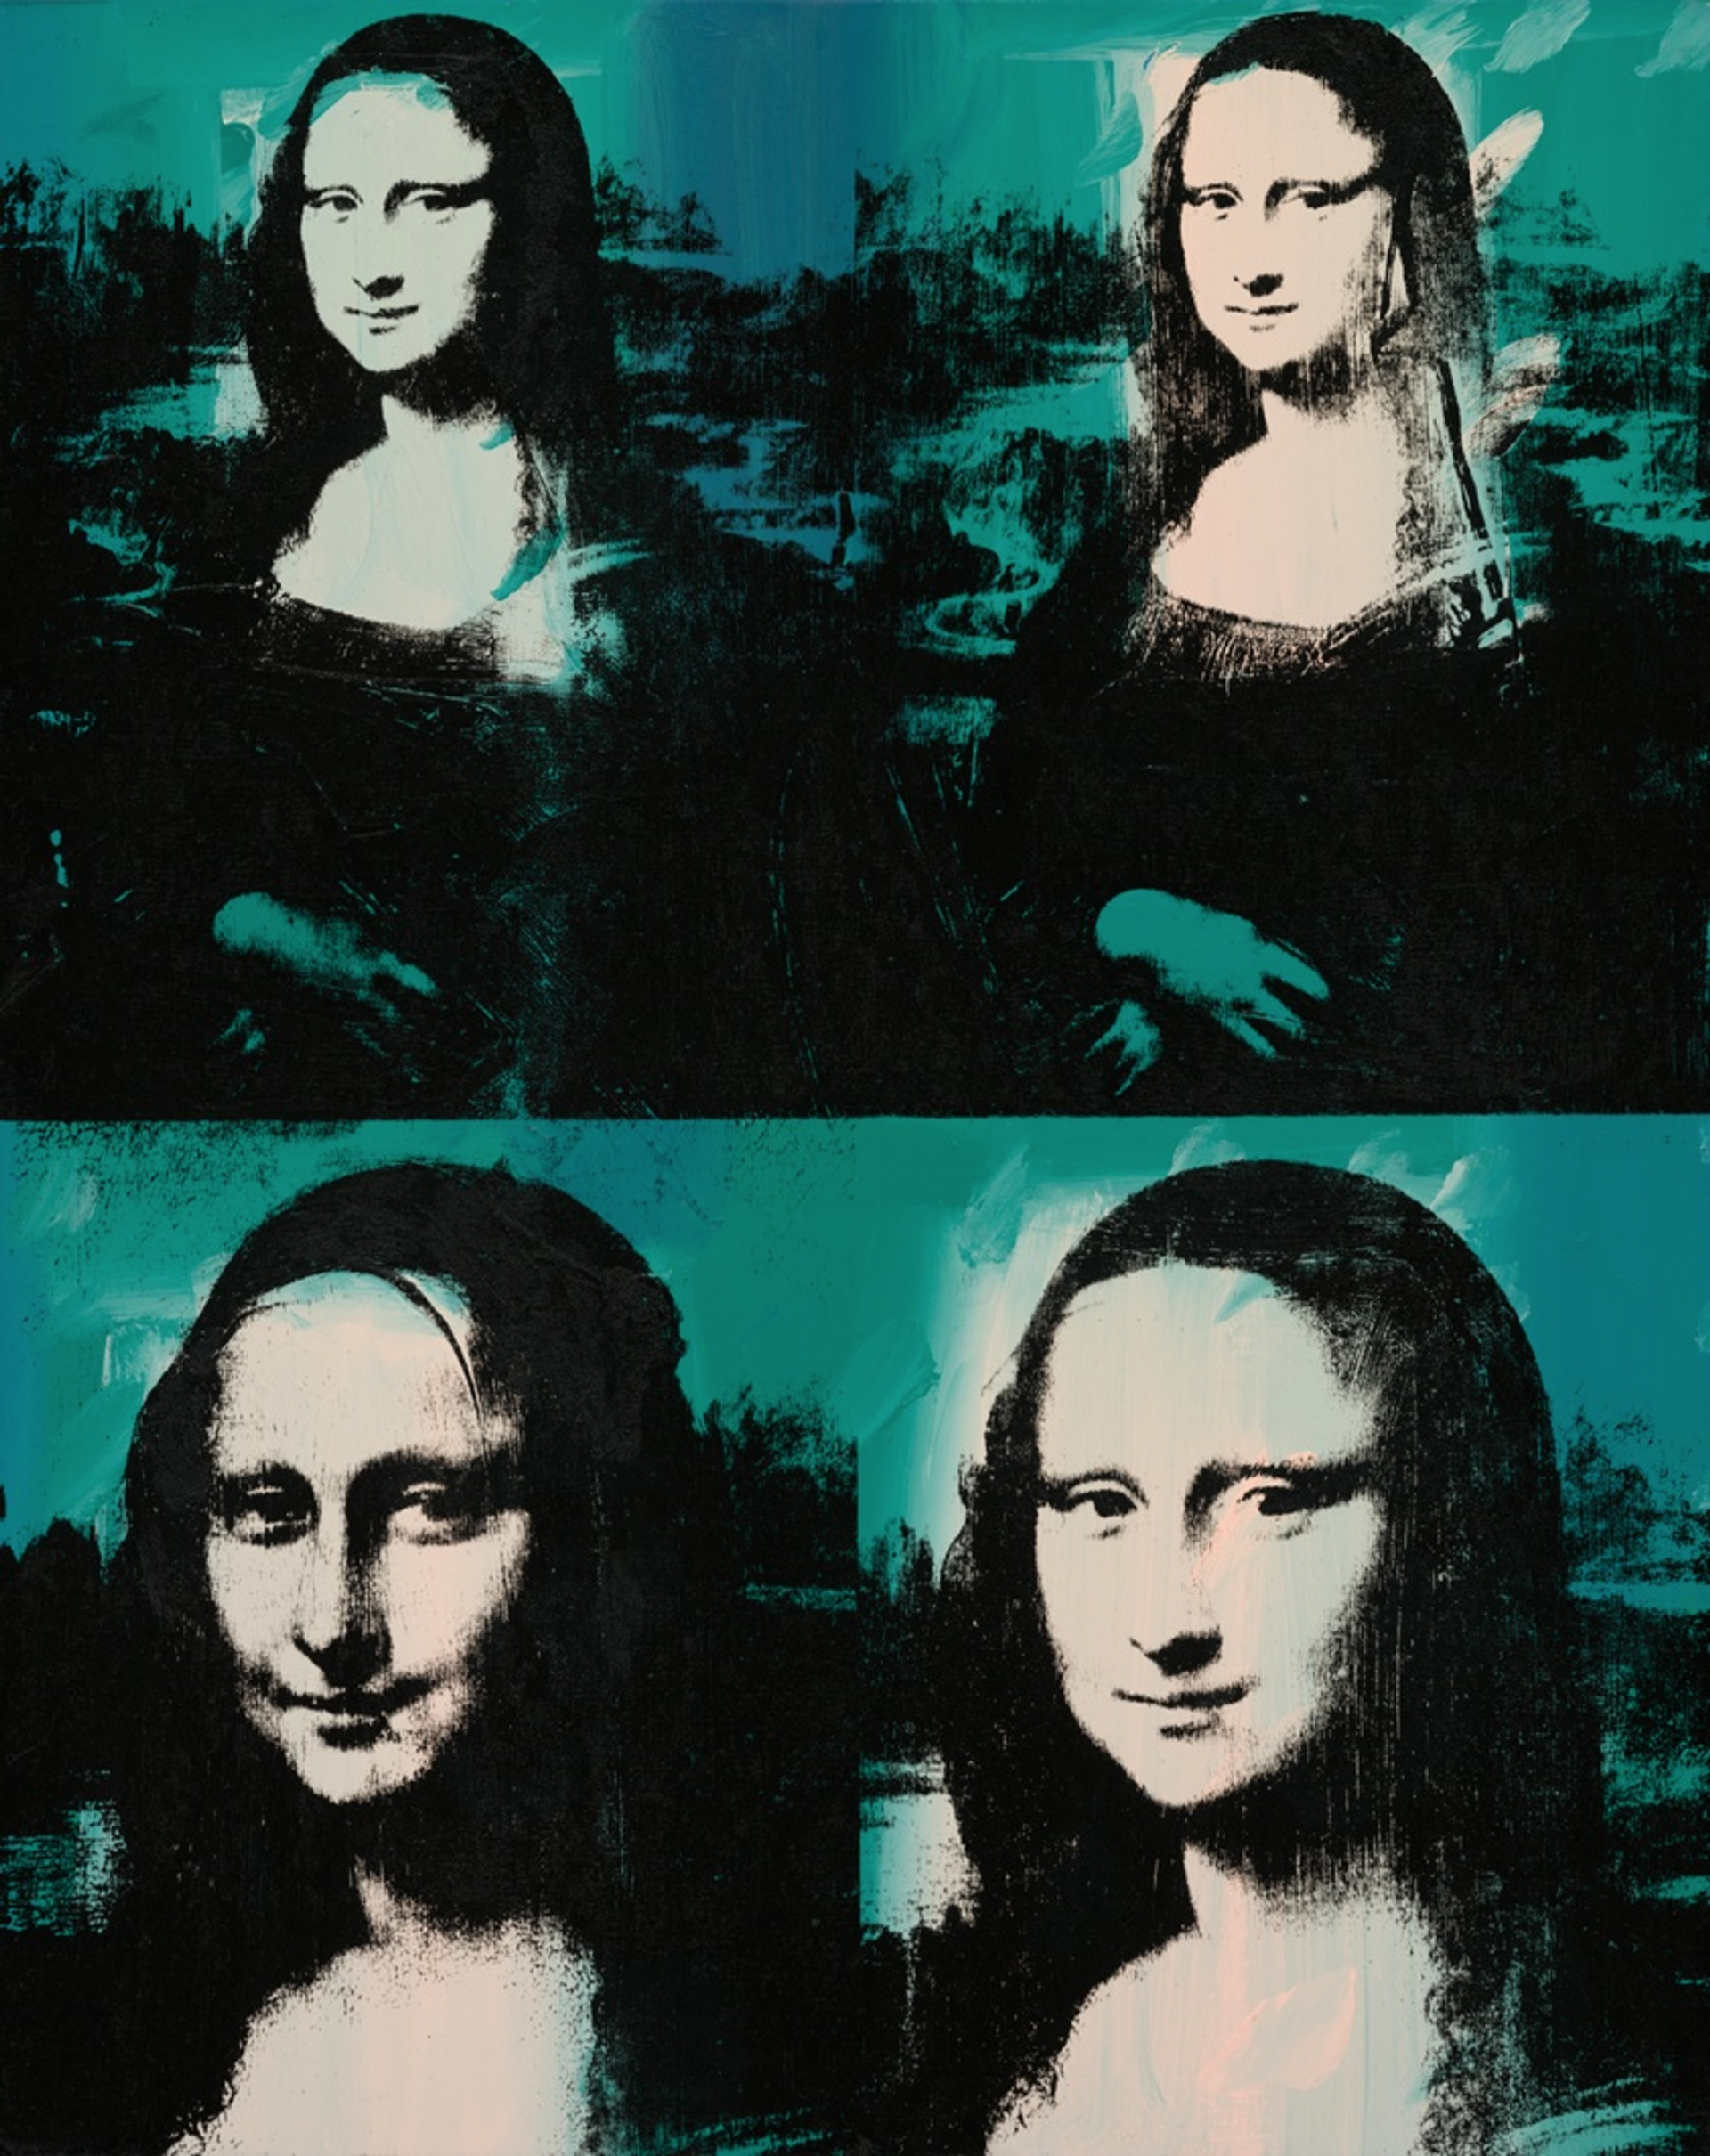 An image of the print Four Mona Lisas by Andy Warhol. Da Vinci's painting is replicated four times, with varying degrees of detail and perspectives. The figure is in black and white, surrounded by teal swathes of colour.